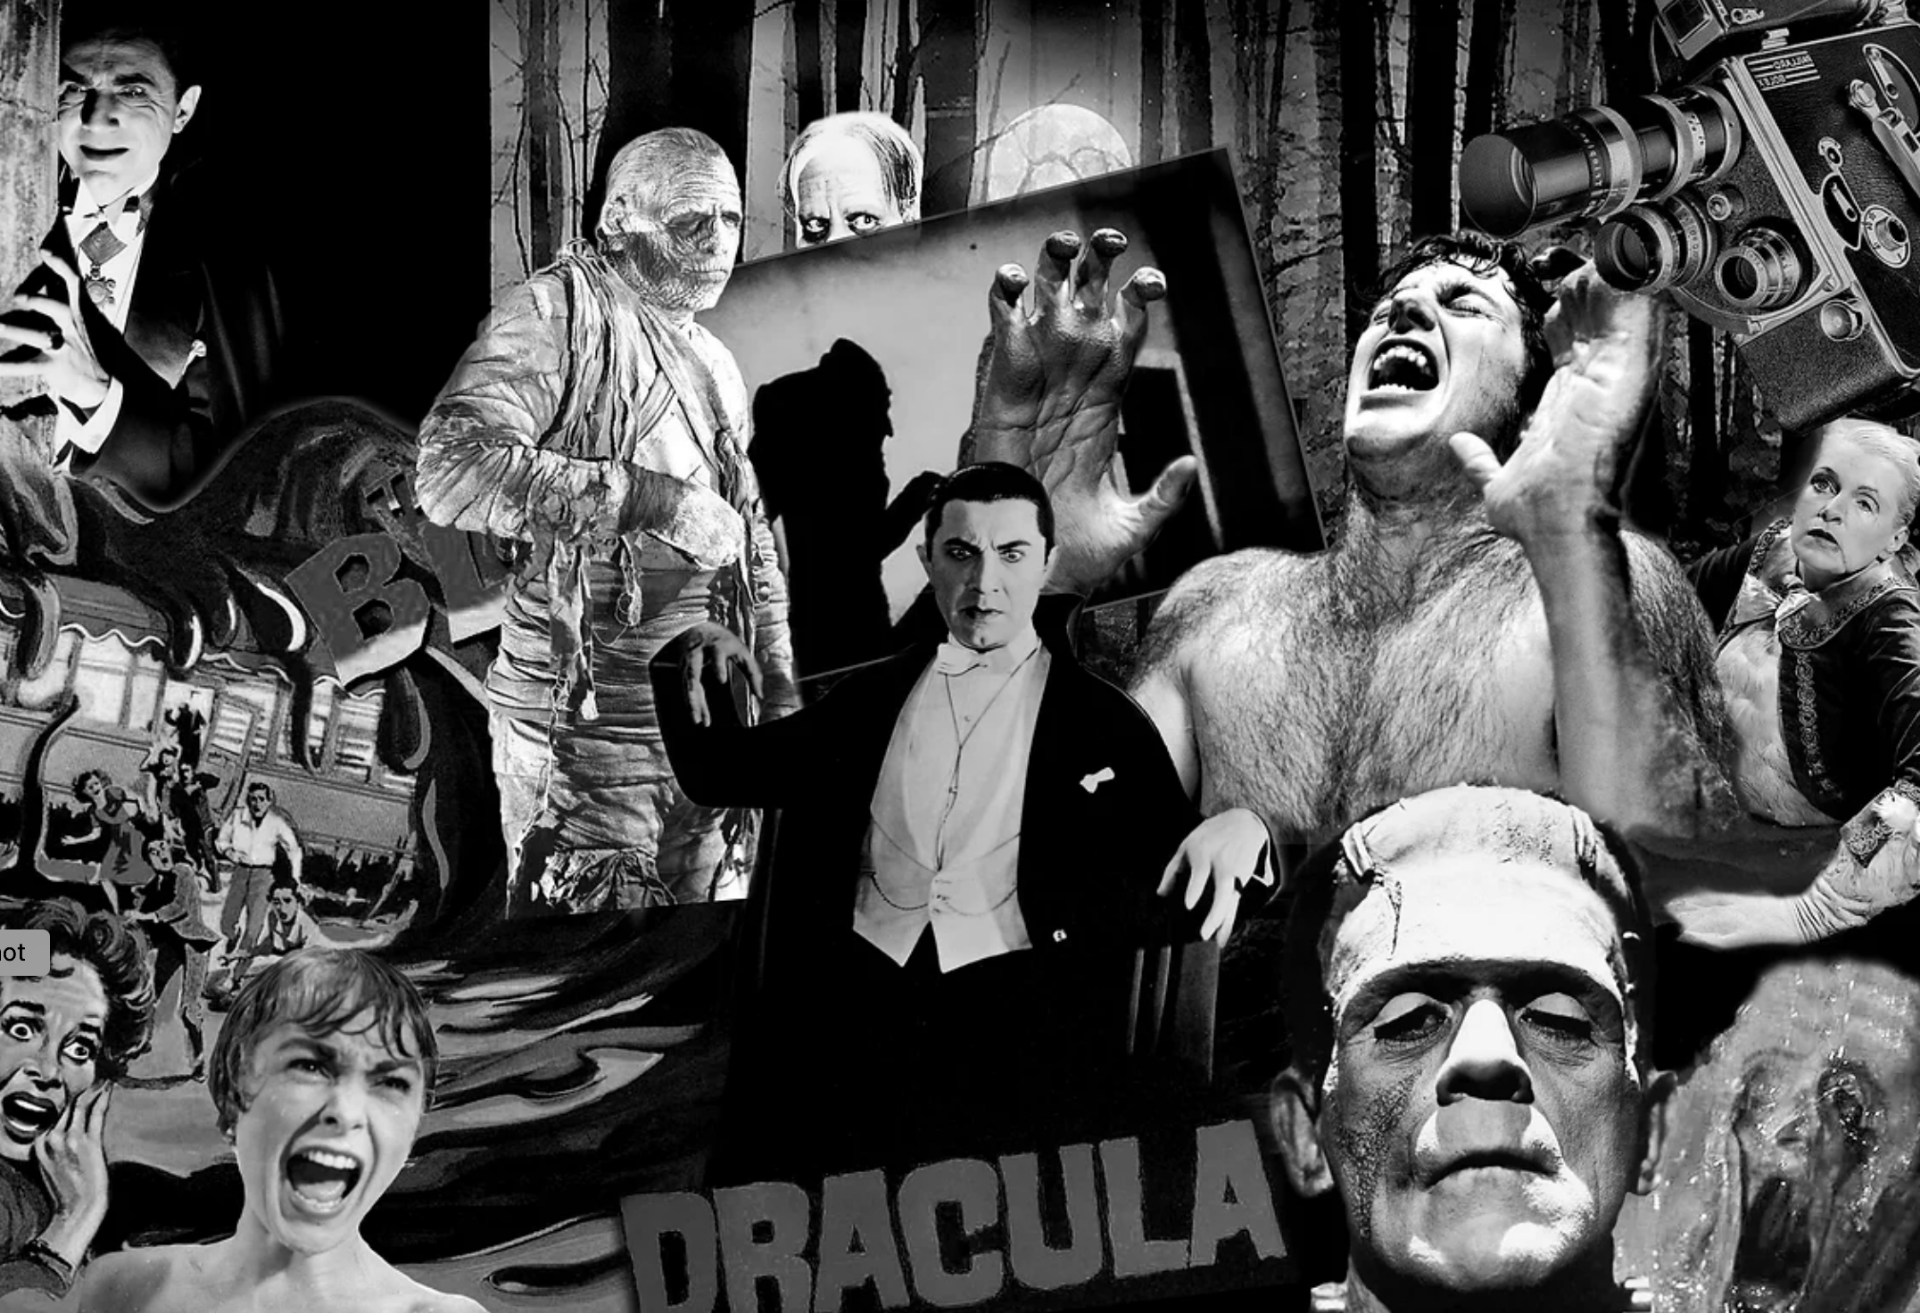 a dense black and white collage of images from Hollywood horror movies